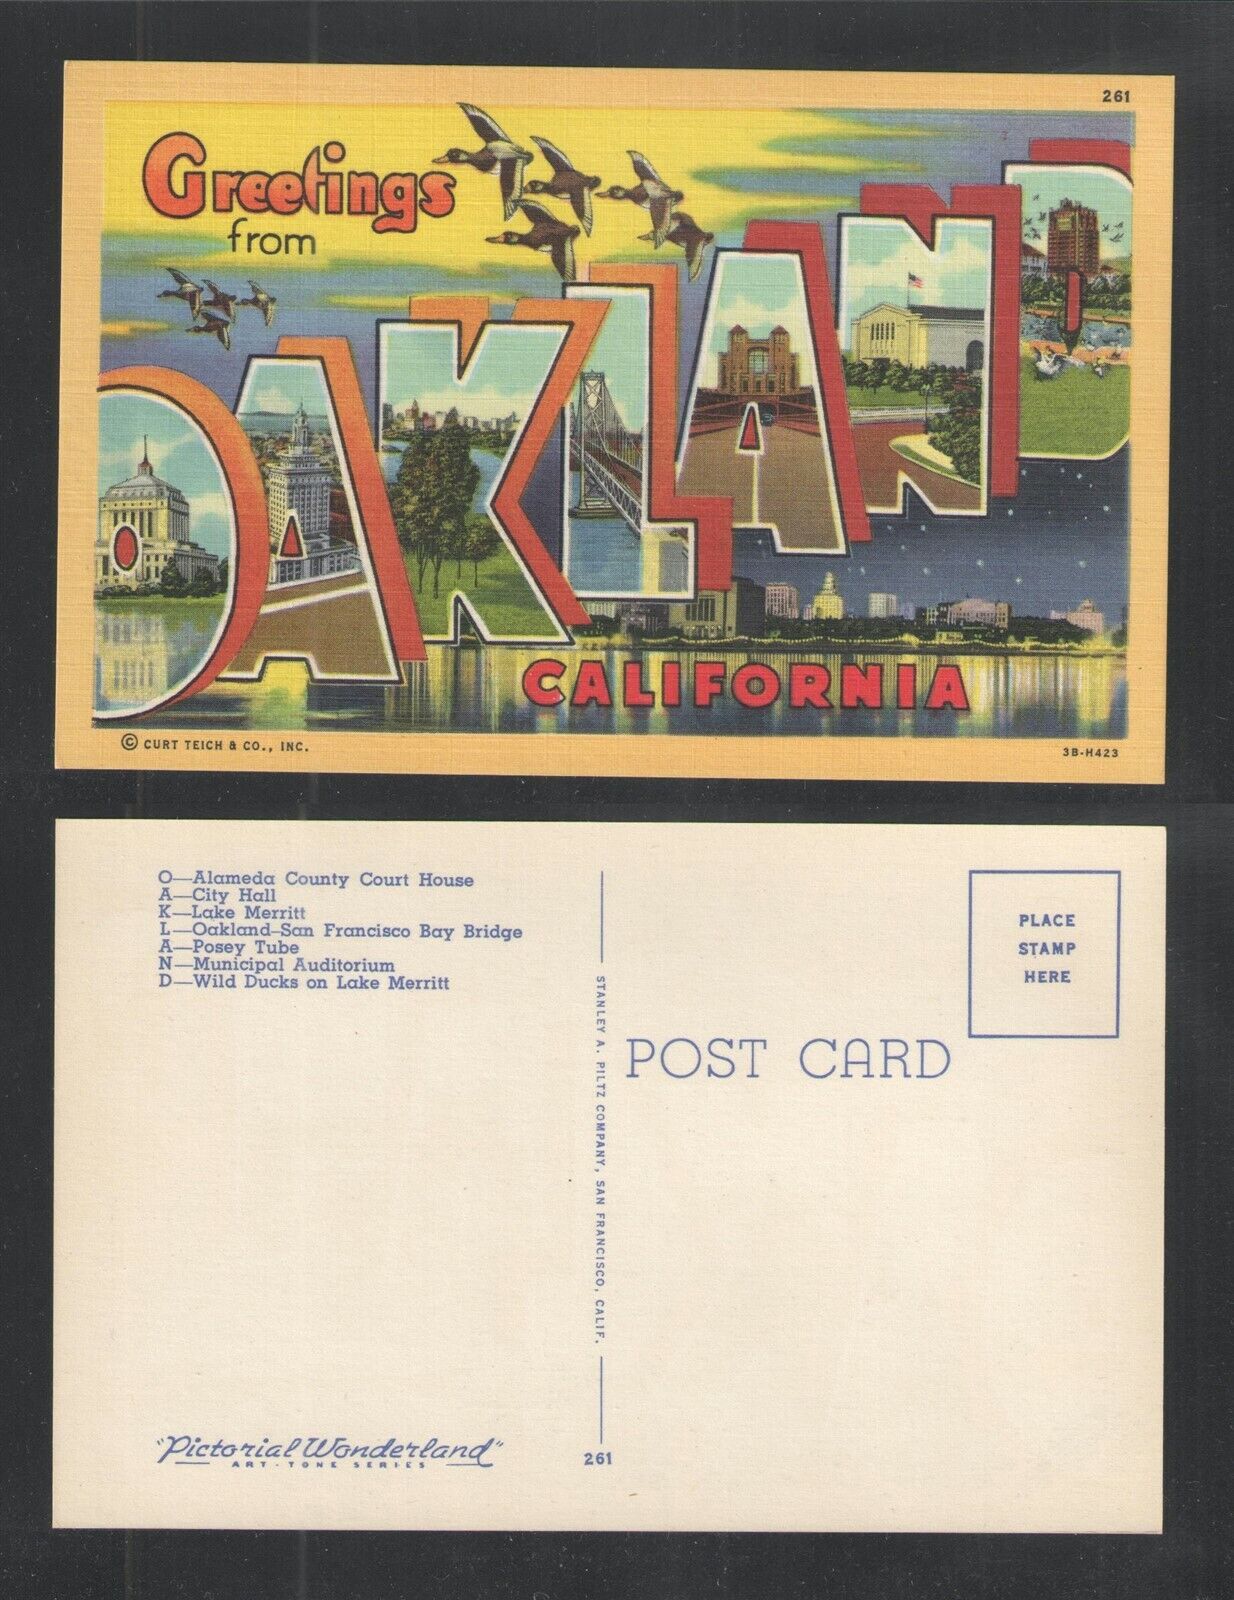 1950s GREETINGS FROM OAKLAND CALIFORNIA LARGE LETTER POSTCARD